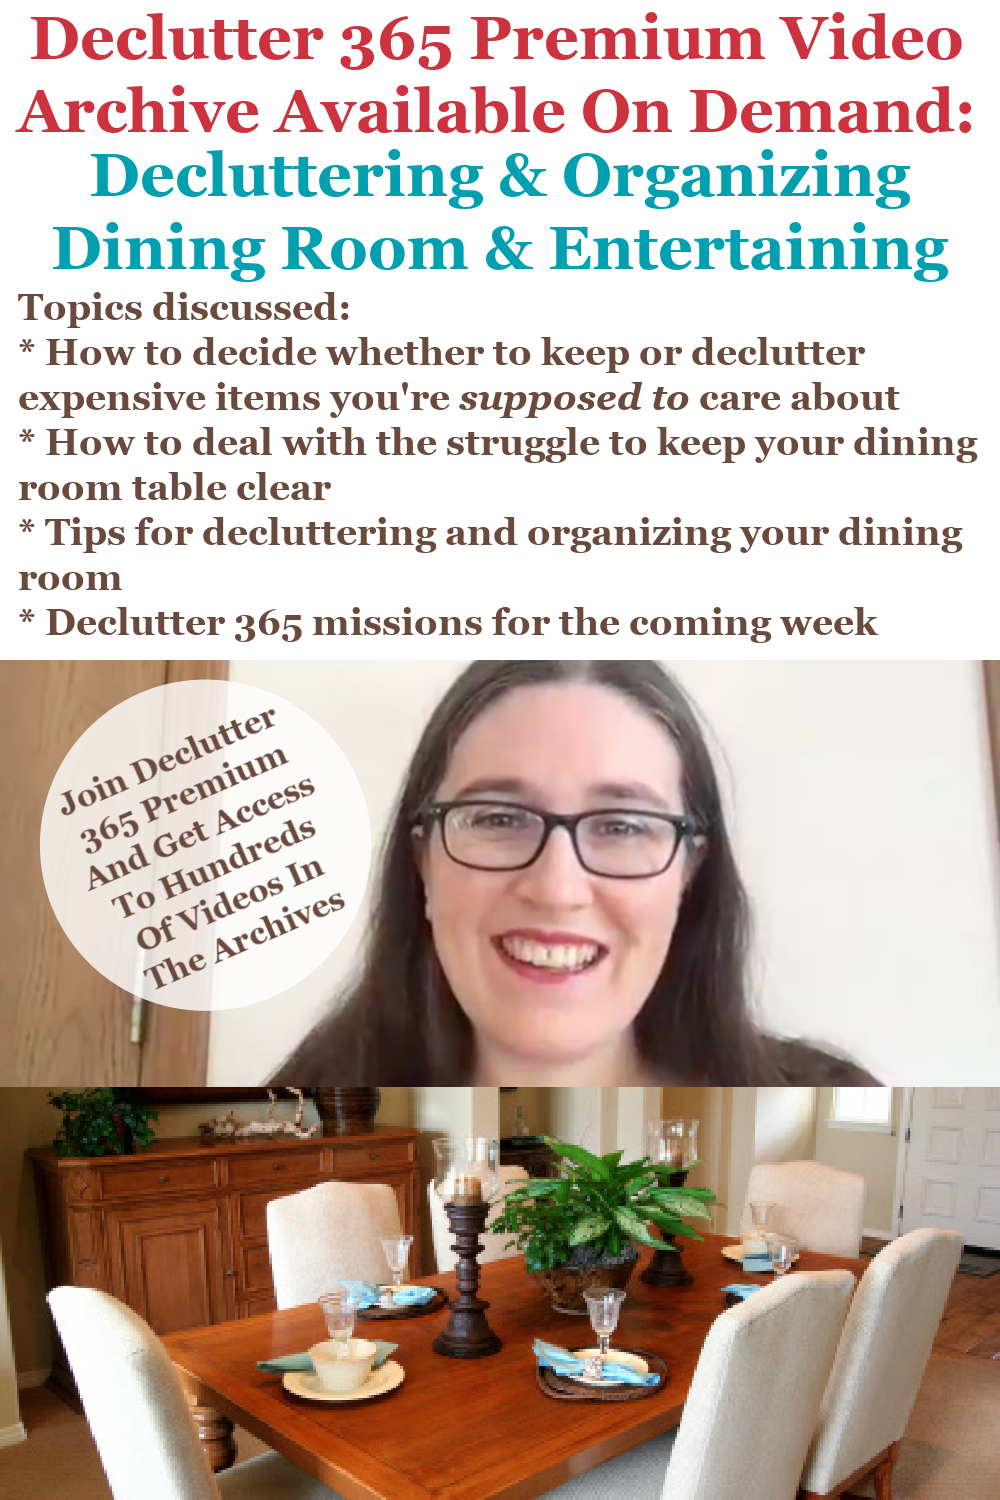 Declutter 365 Premium video archive available on demand all about decluttering and organizing your dining room, and entertaining, on Home Storage Solutions 101